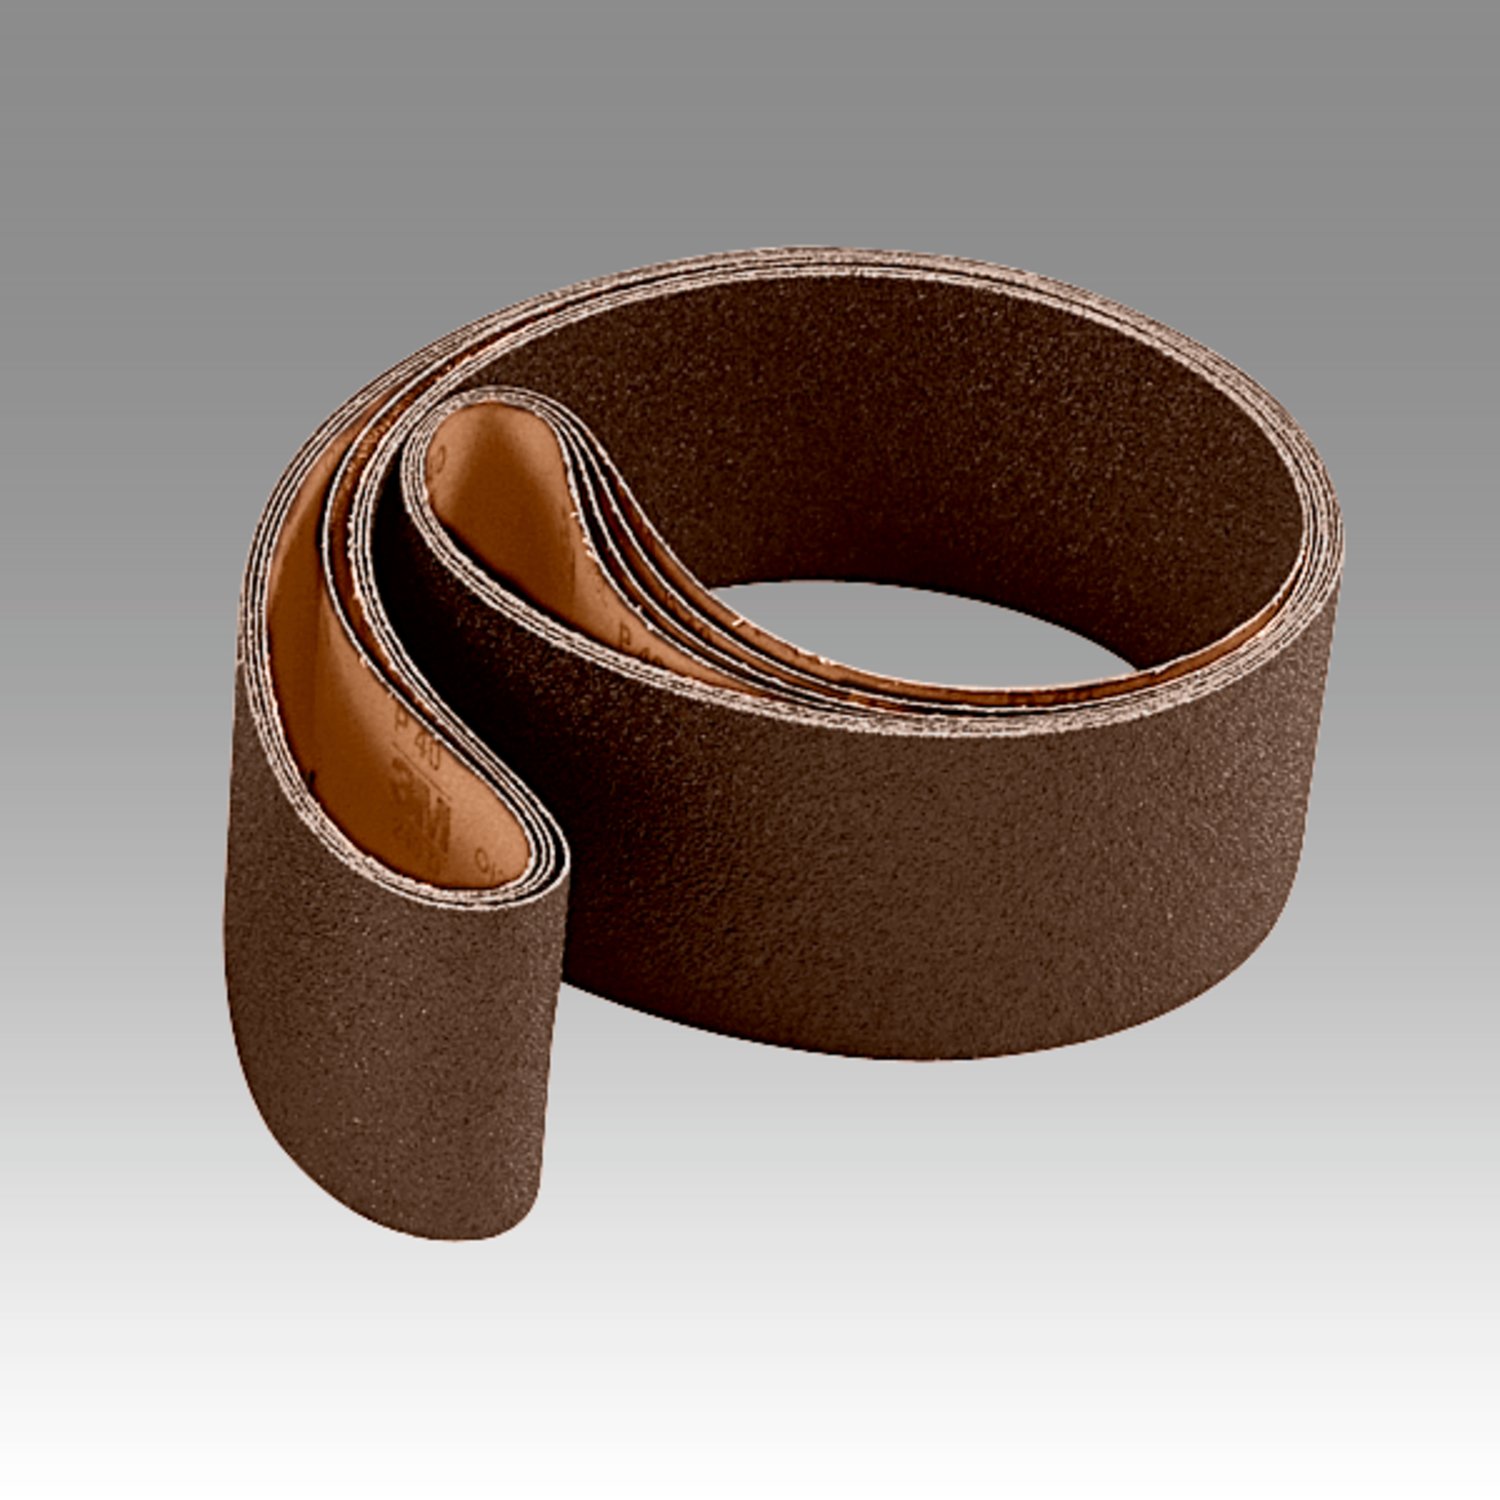 CS 411 Y — Wide belts with cloth backing for Steel, Stainless